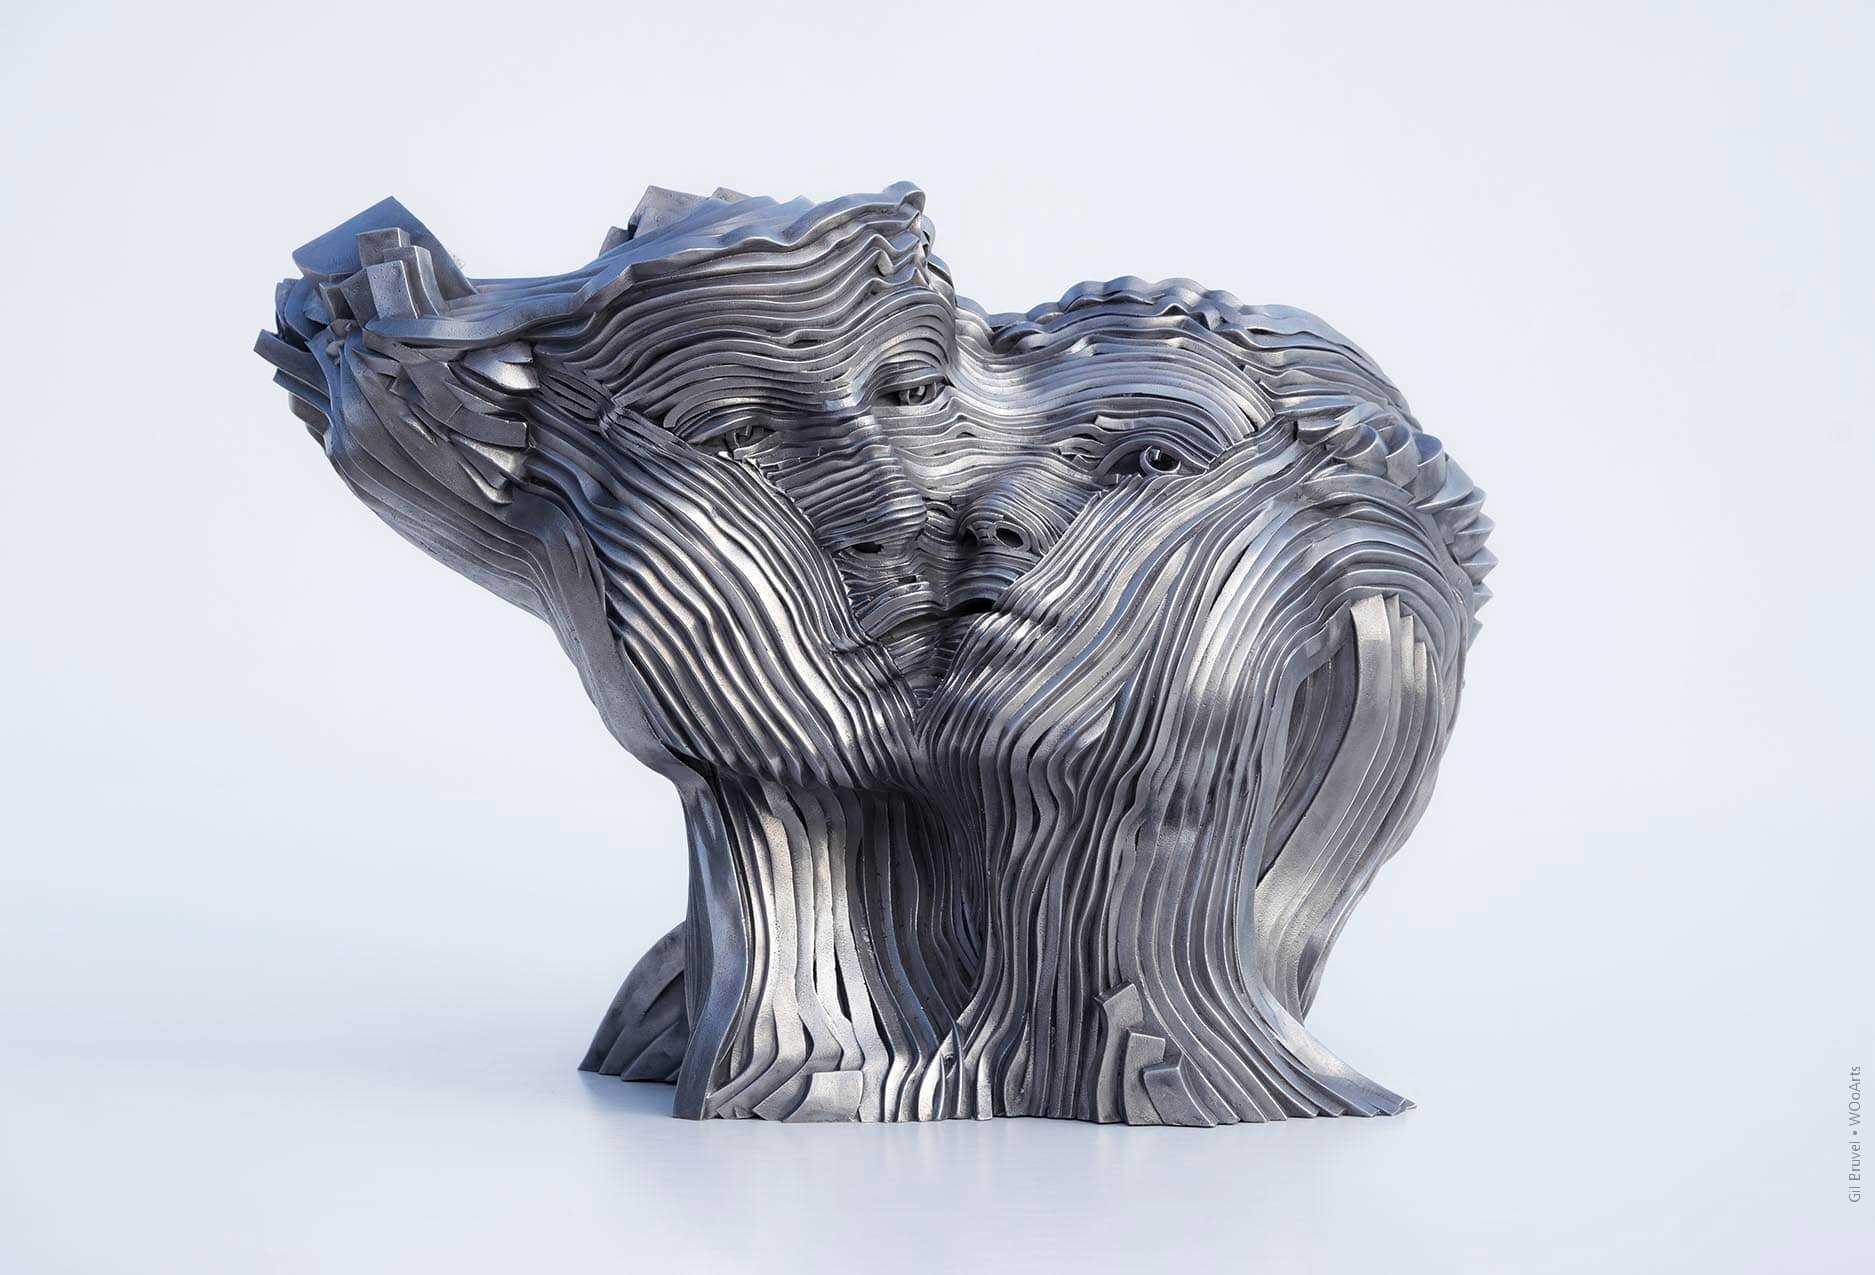 Sculpture by Gil Bruvel